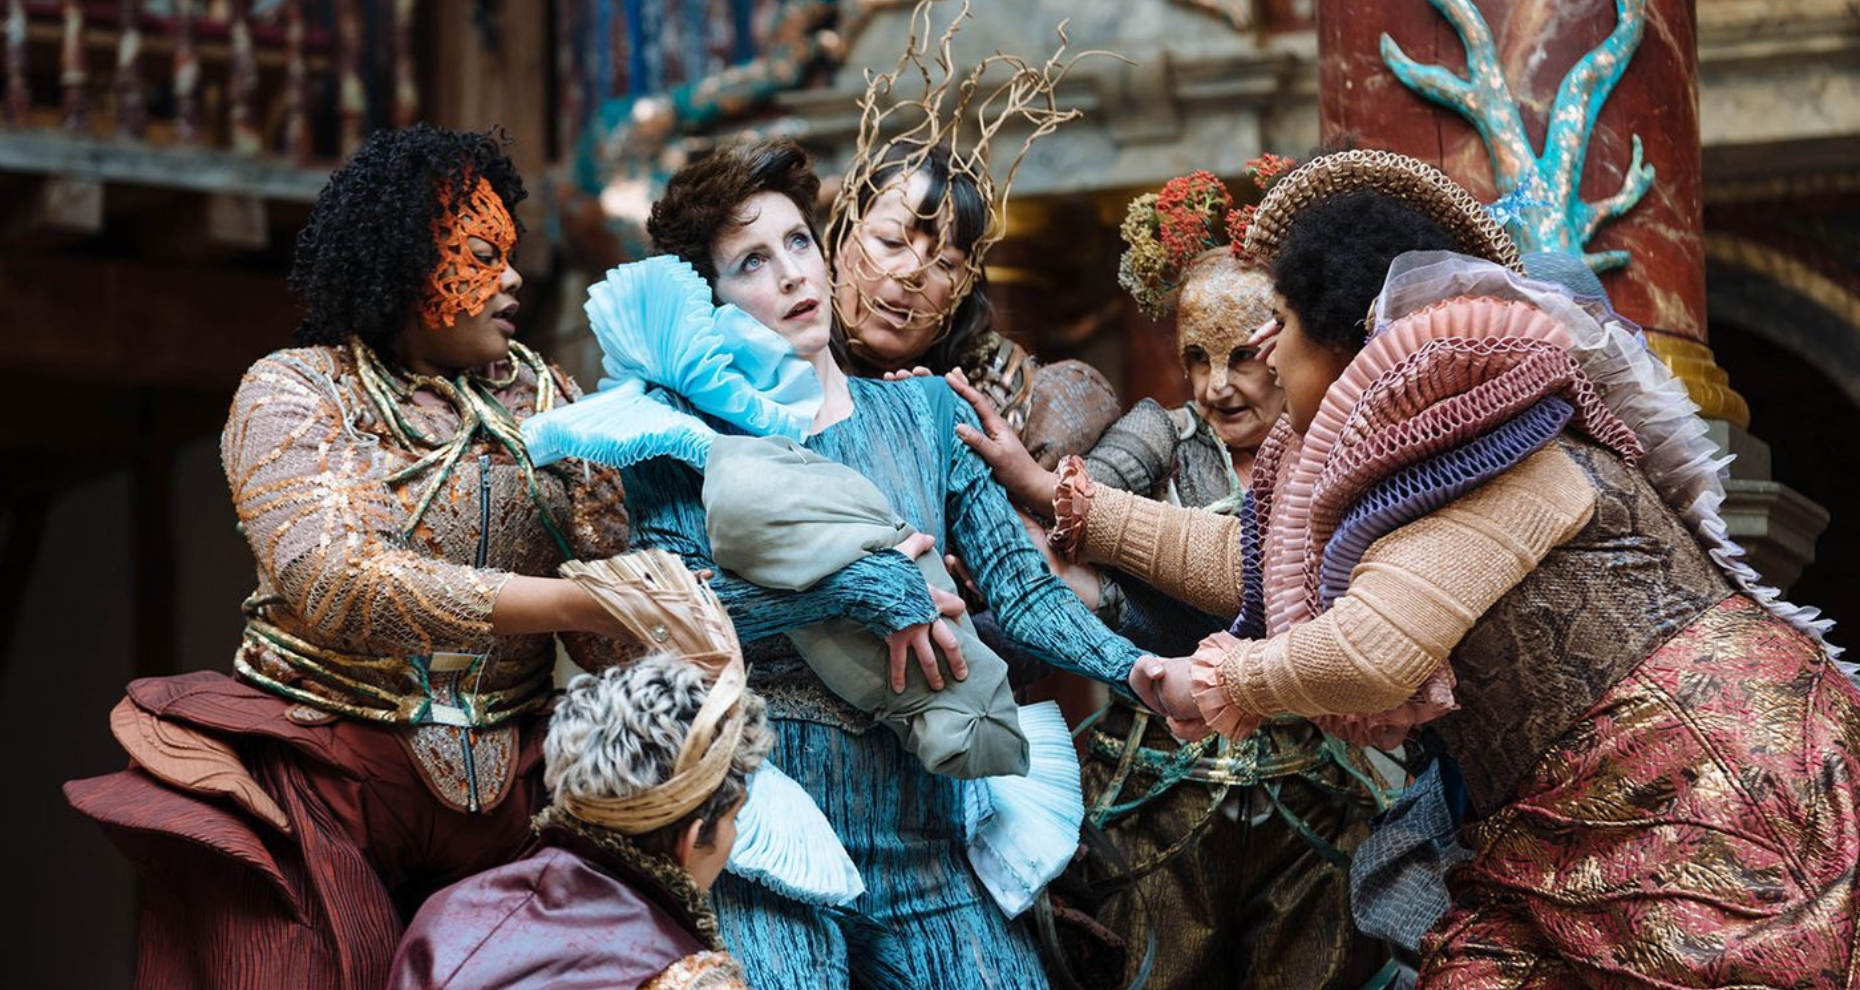 https://everything-theatre.co.uk/wp-content/uploads/2023/04/A-Midsummer-Nights-Dream-Shakespeares-Globe.png